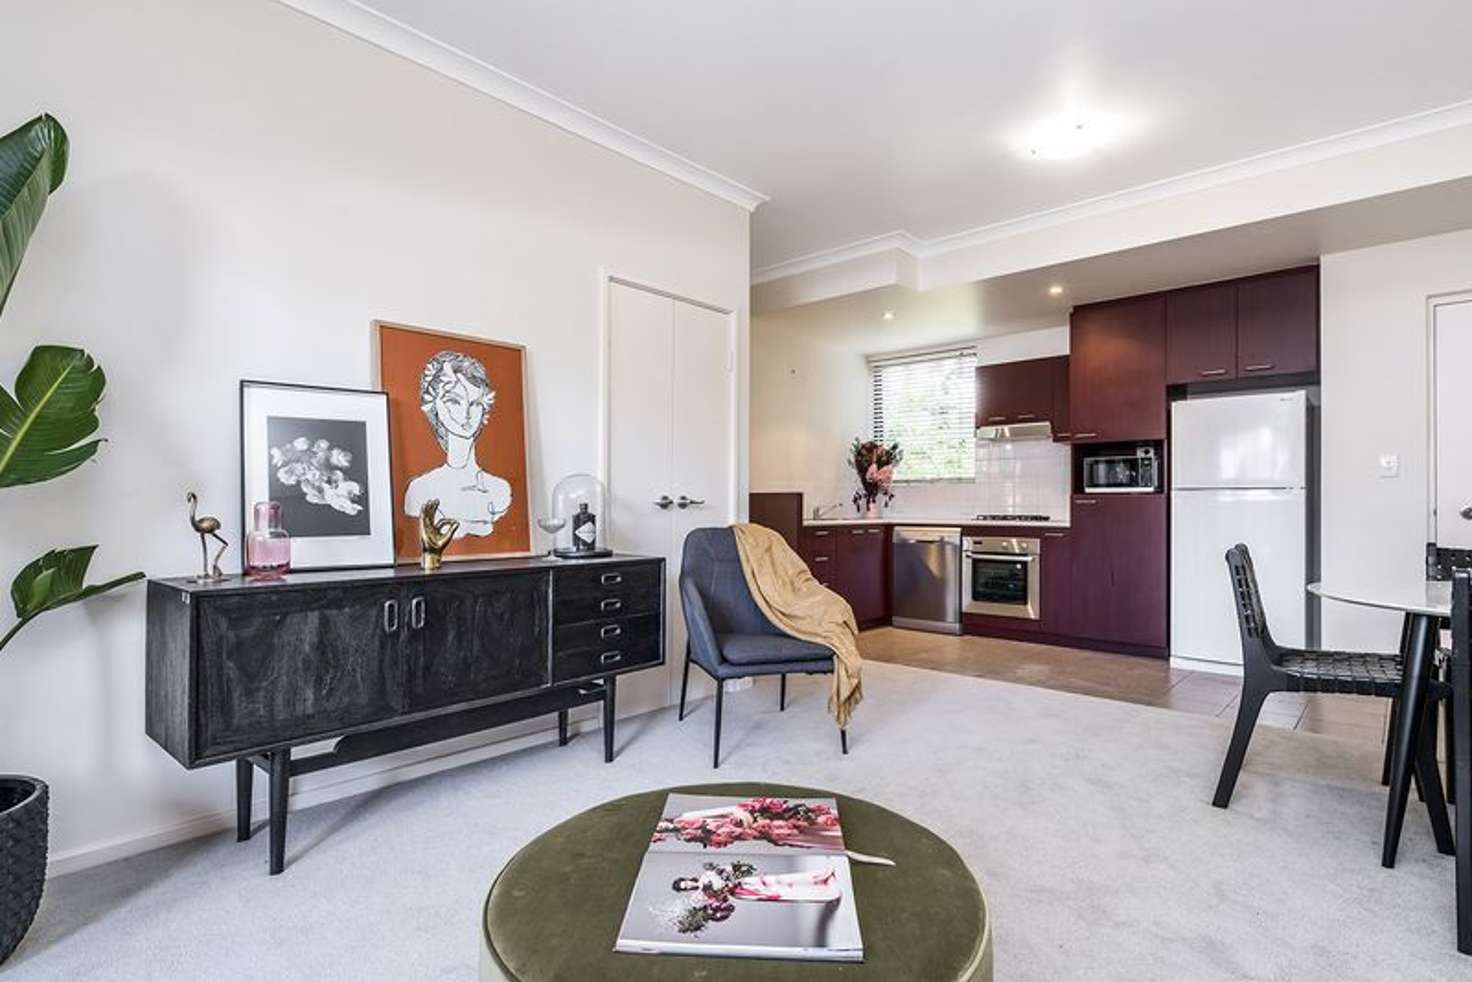 Main view of Homely apartment listing, 95/250 Beaufort Street, Perth WA 6000